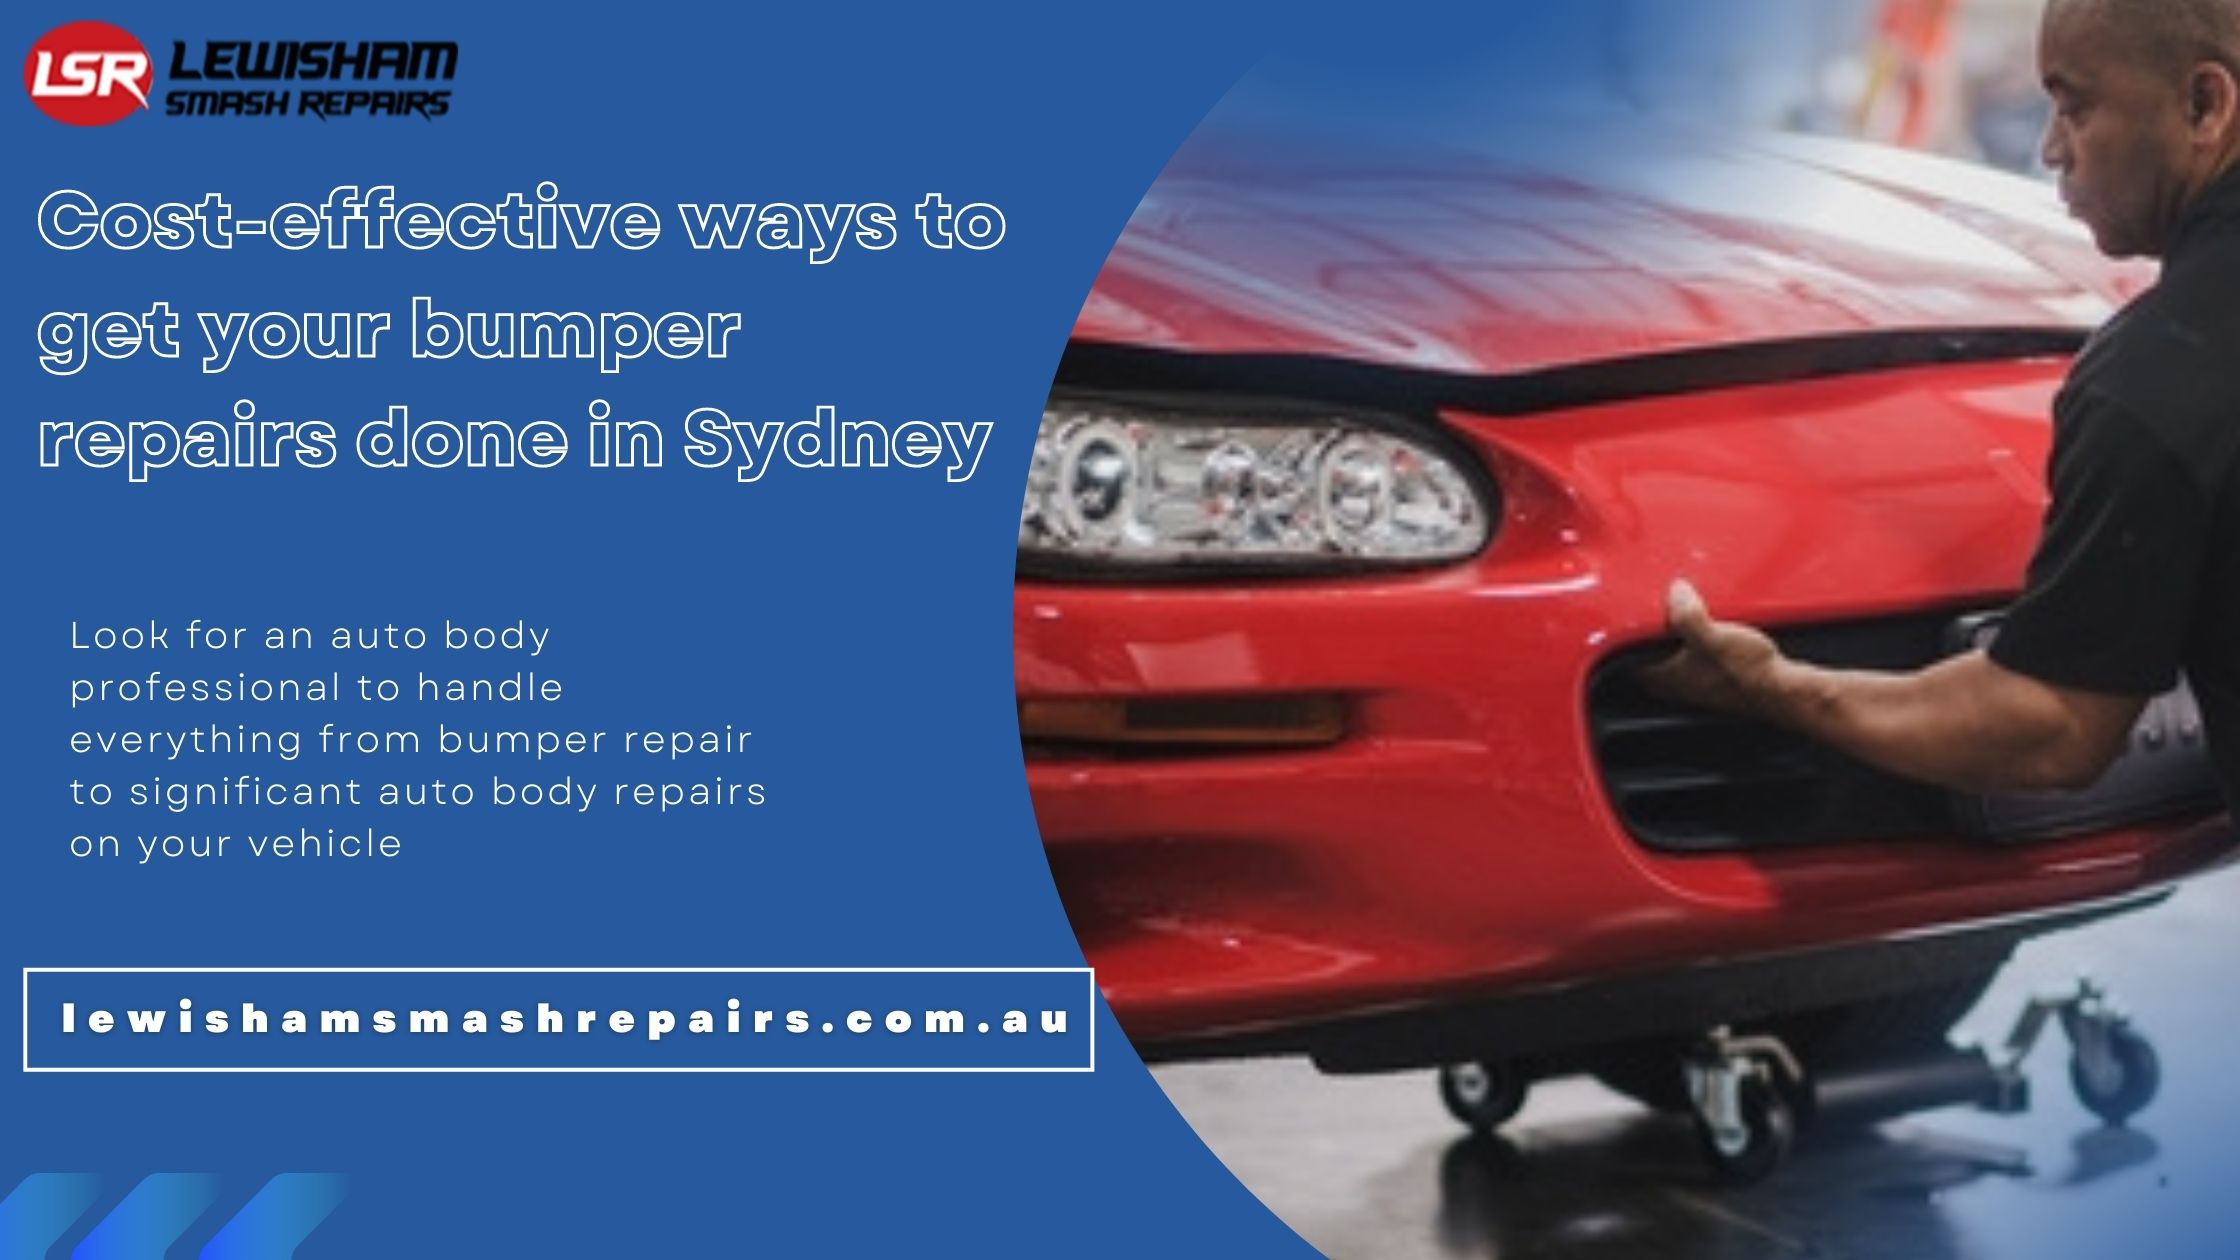 Cost-effective ways to get your bumper repairs done in Sydney